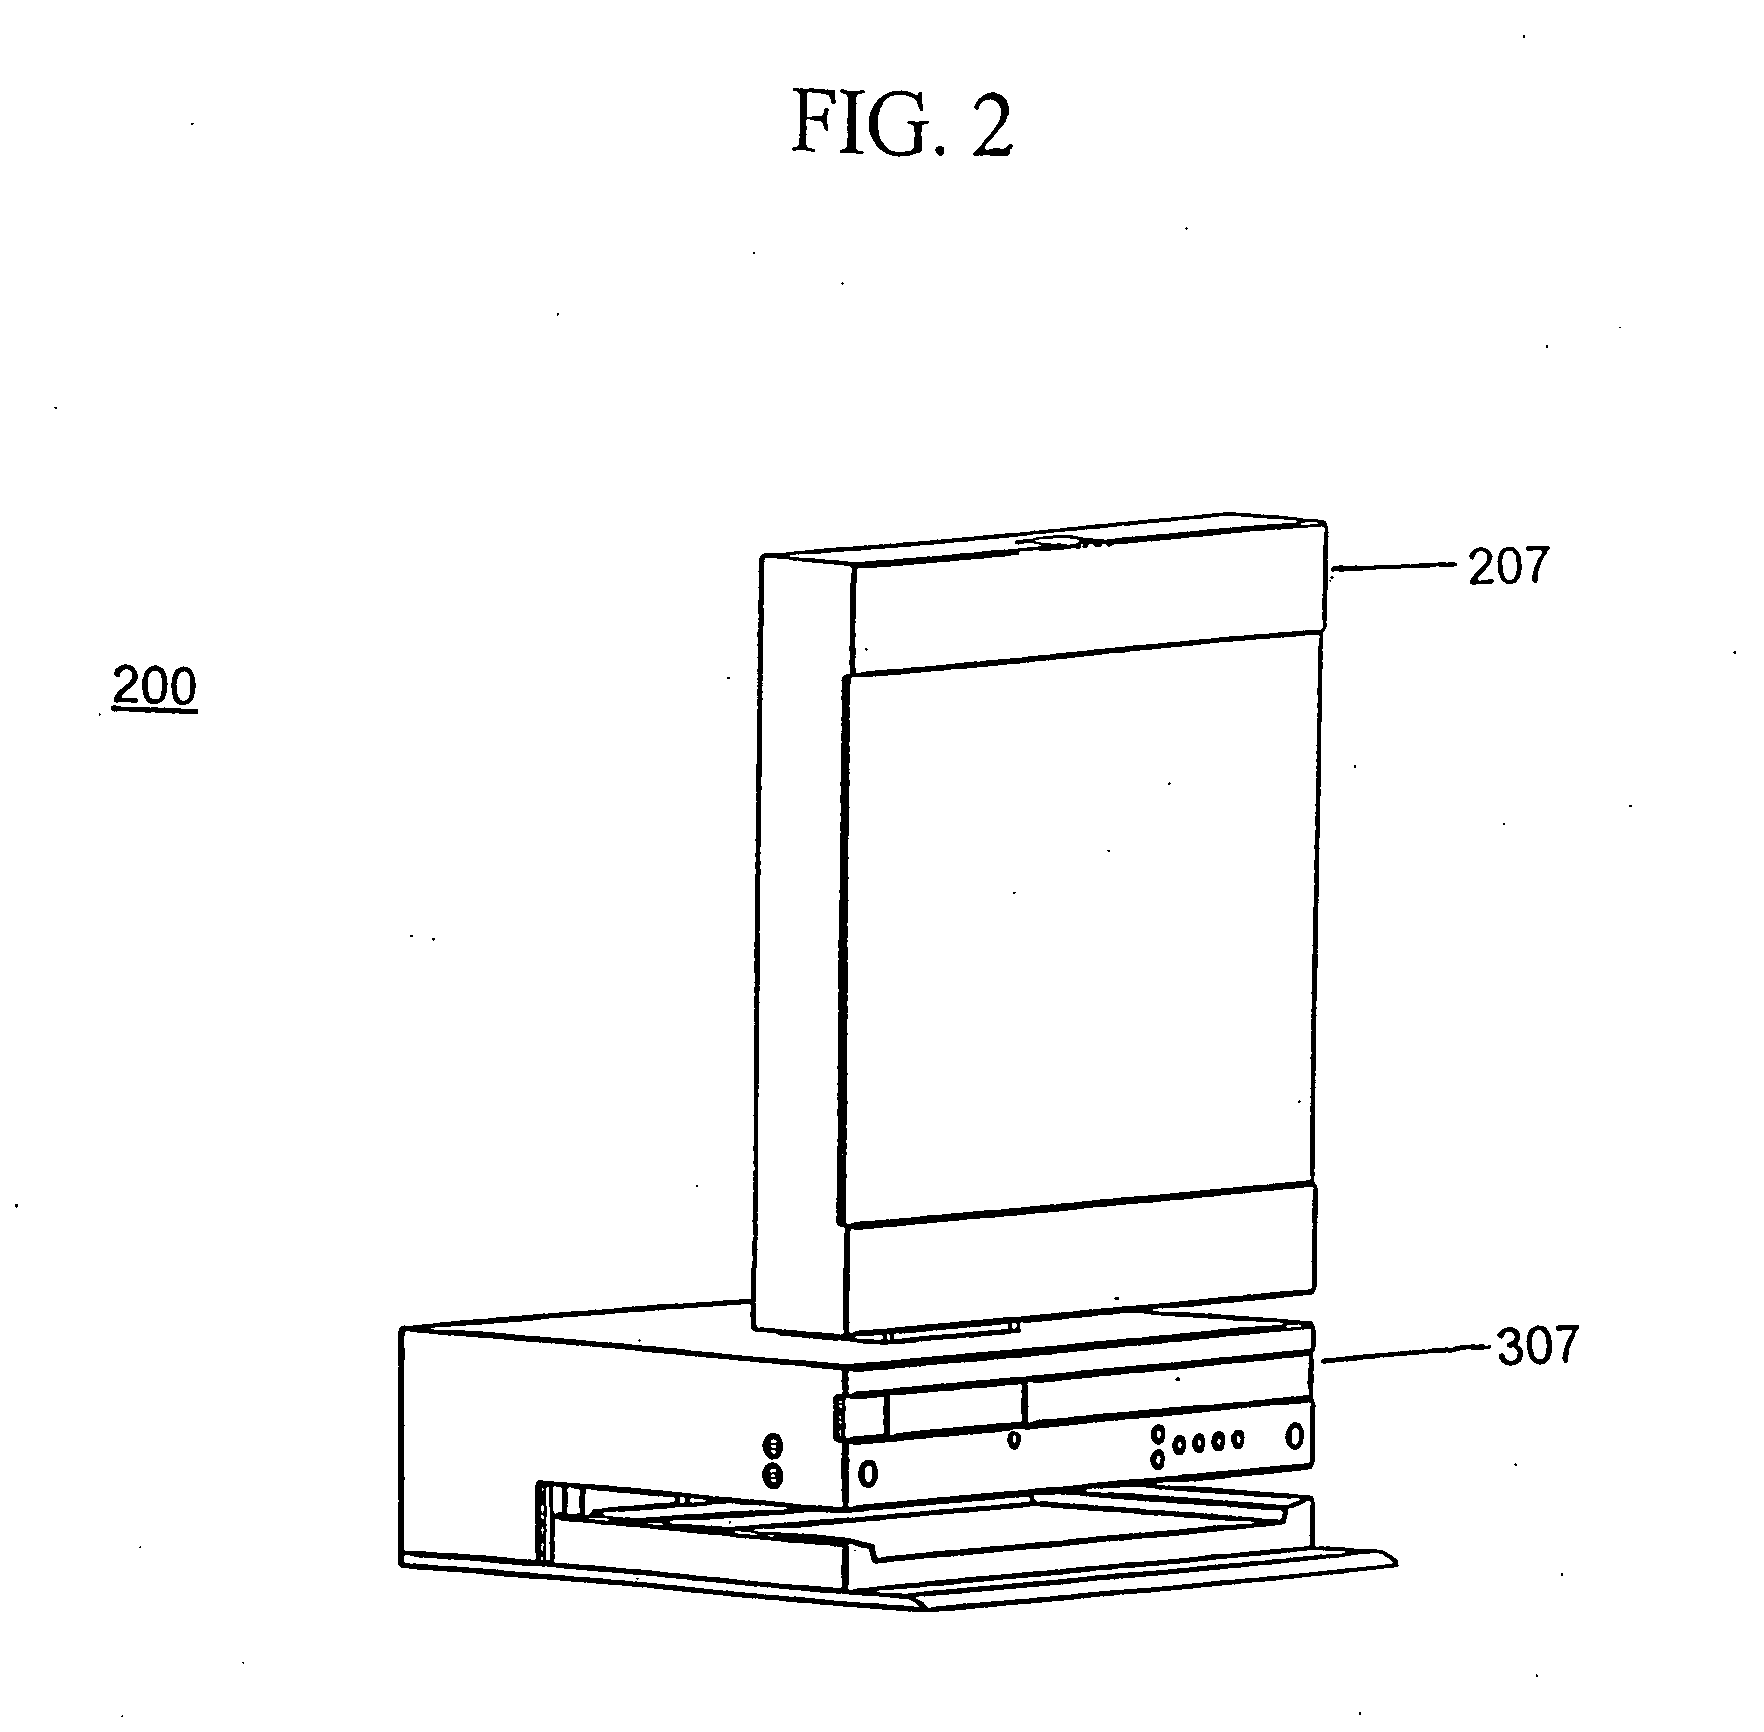 Auxiliary display unit for a computer system